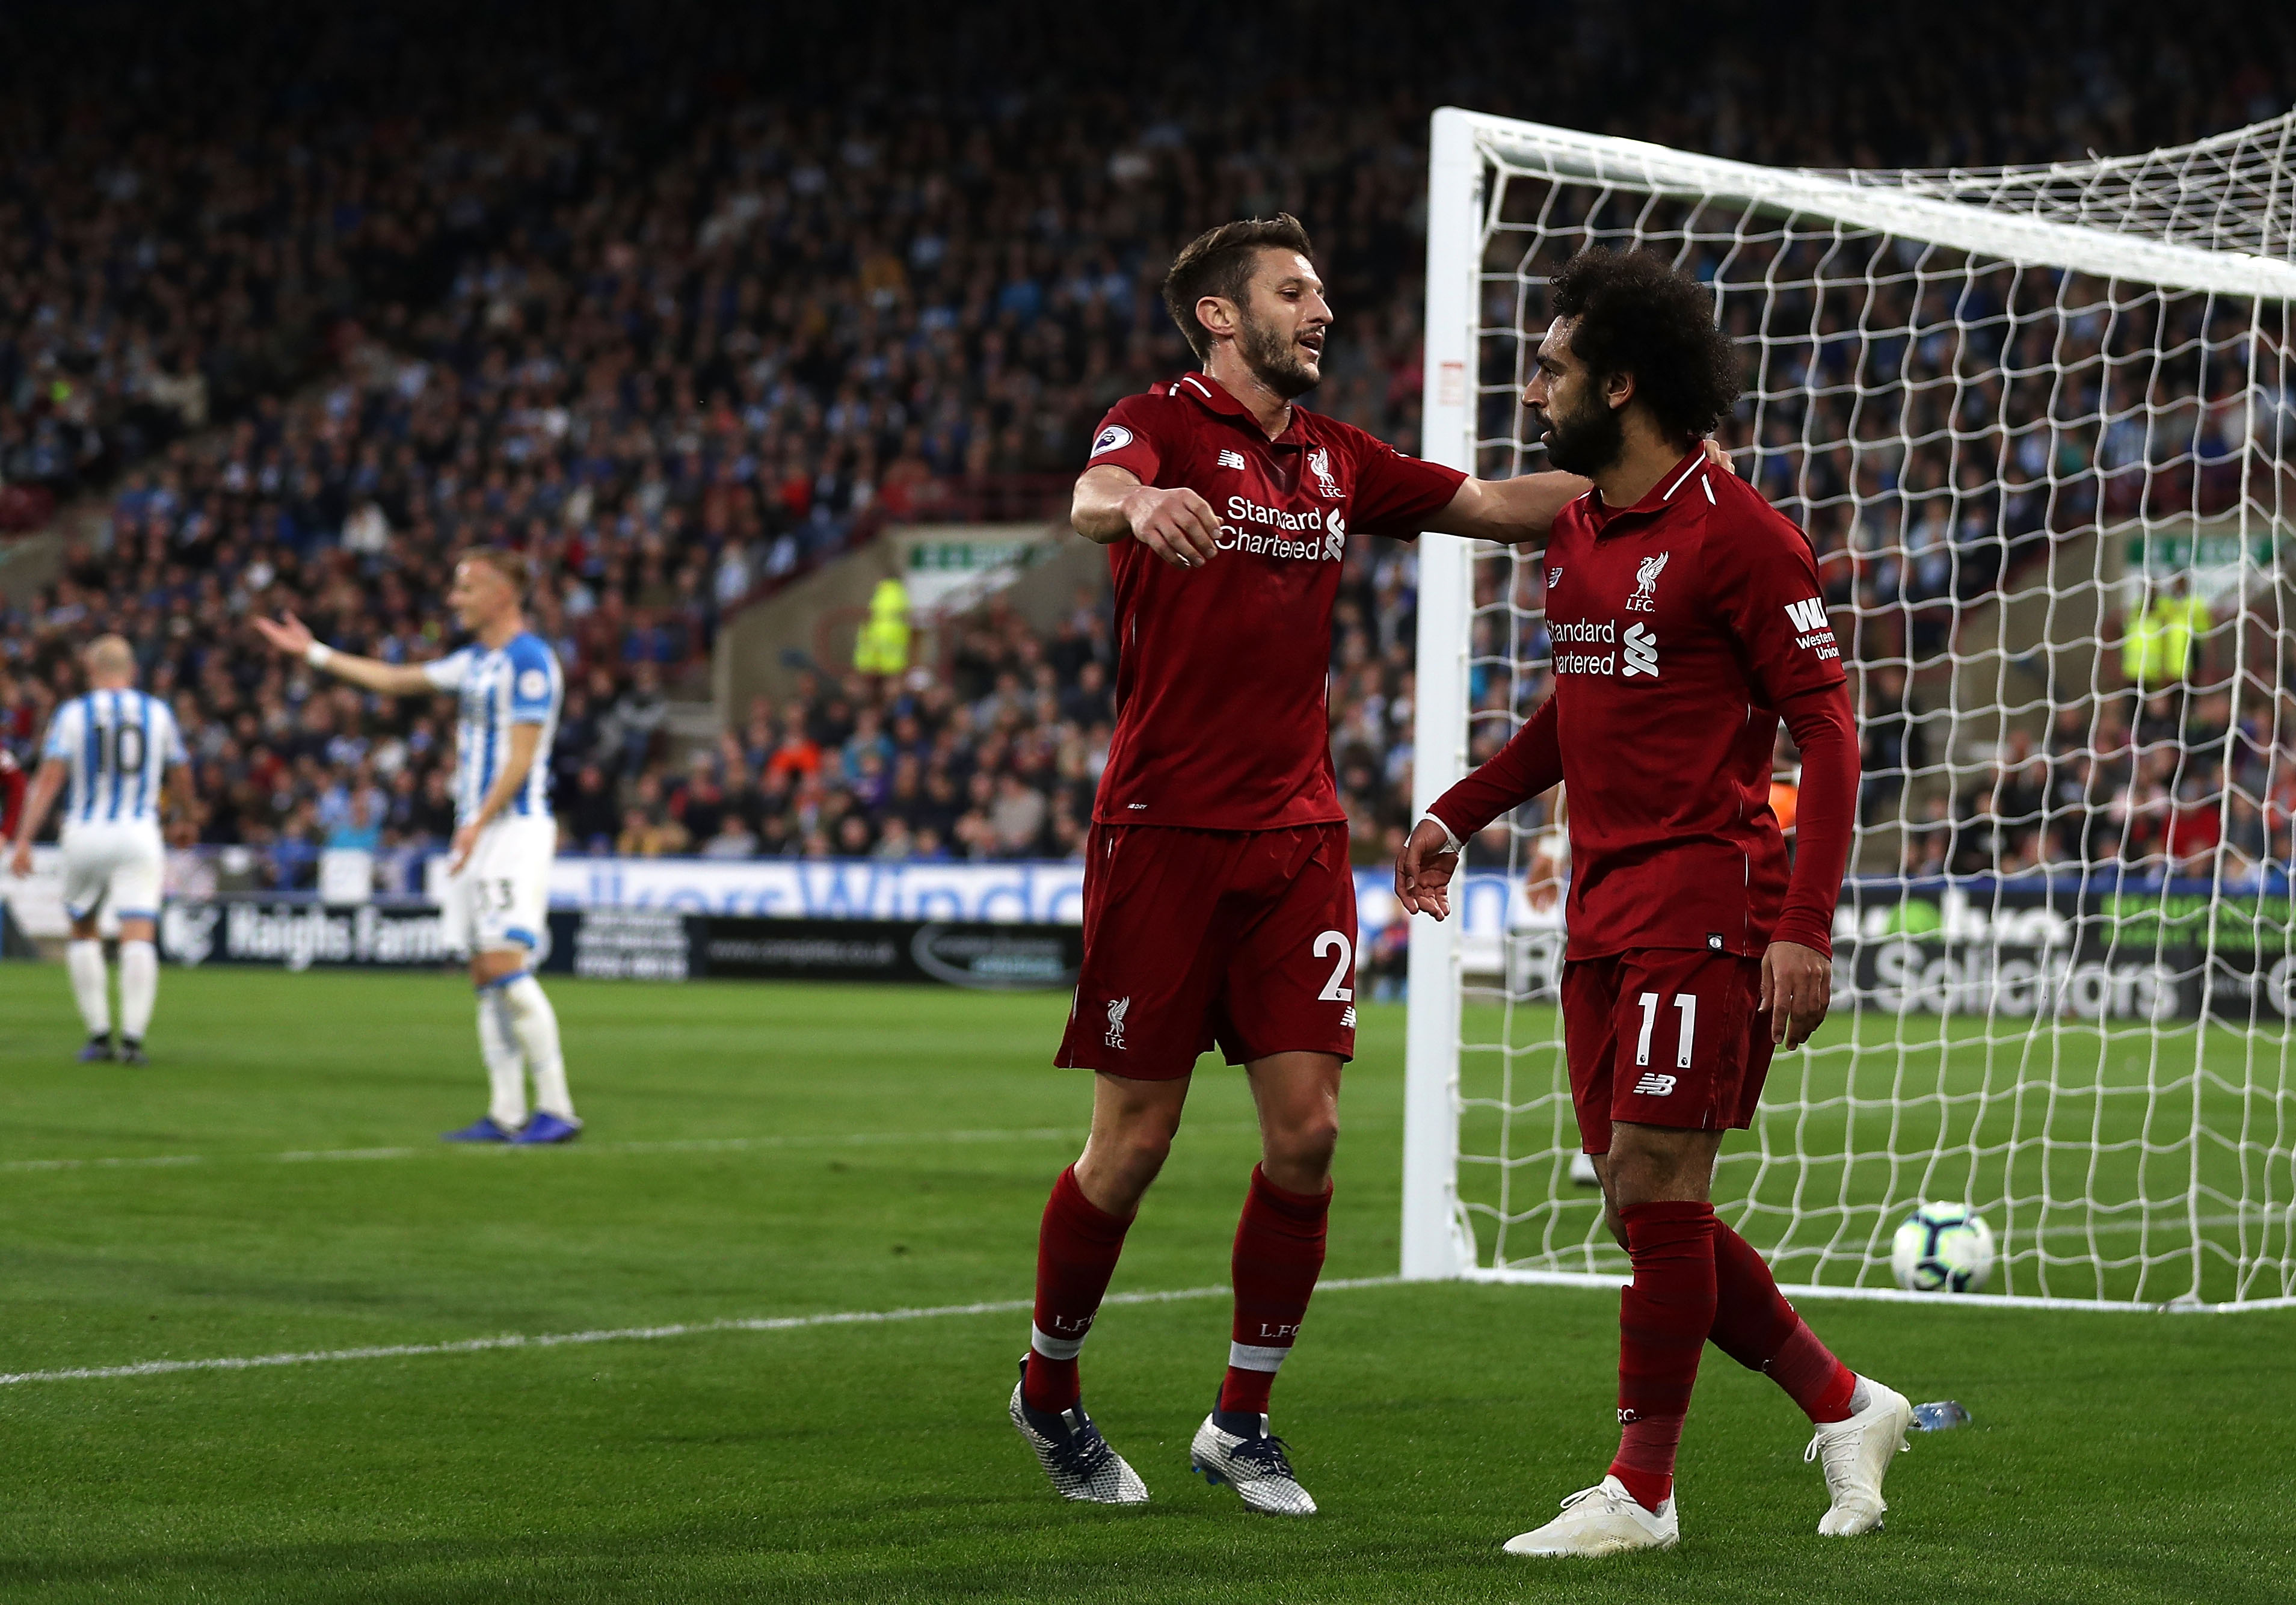 HUDDERSFIELD, ENGLAND - OCTOBER 20: Mohamed Salah of Liverpool(R) celebrates with Adam Lallana of Liverpool after scoring his sides first goal during the Premier League match between Huddersfield Town and Liverpool FC at John Smith's Stadium on October 20, 2018 in Huddersfield, United Kingdom. (Photo by Mark Robinson/Getty Images)